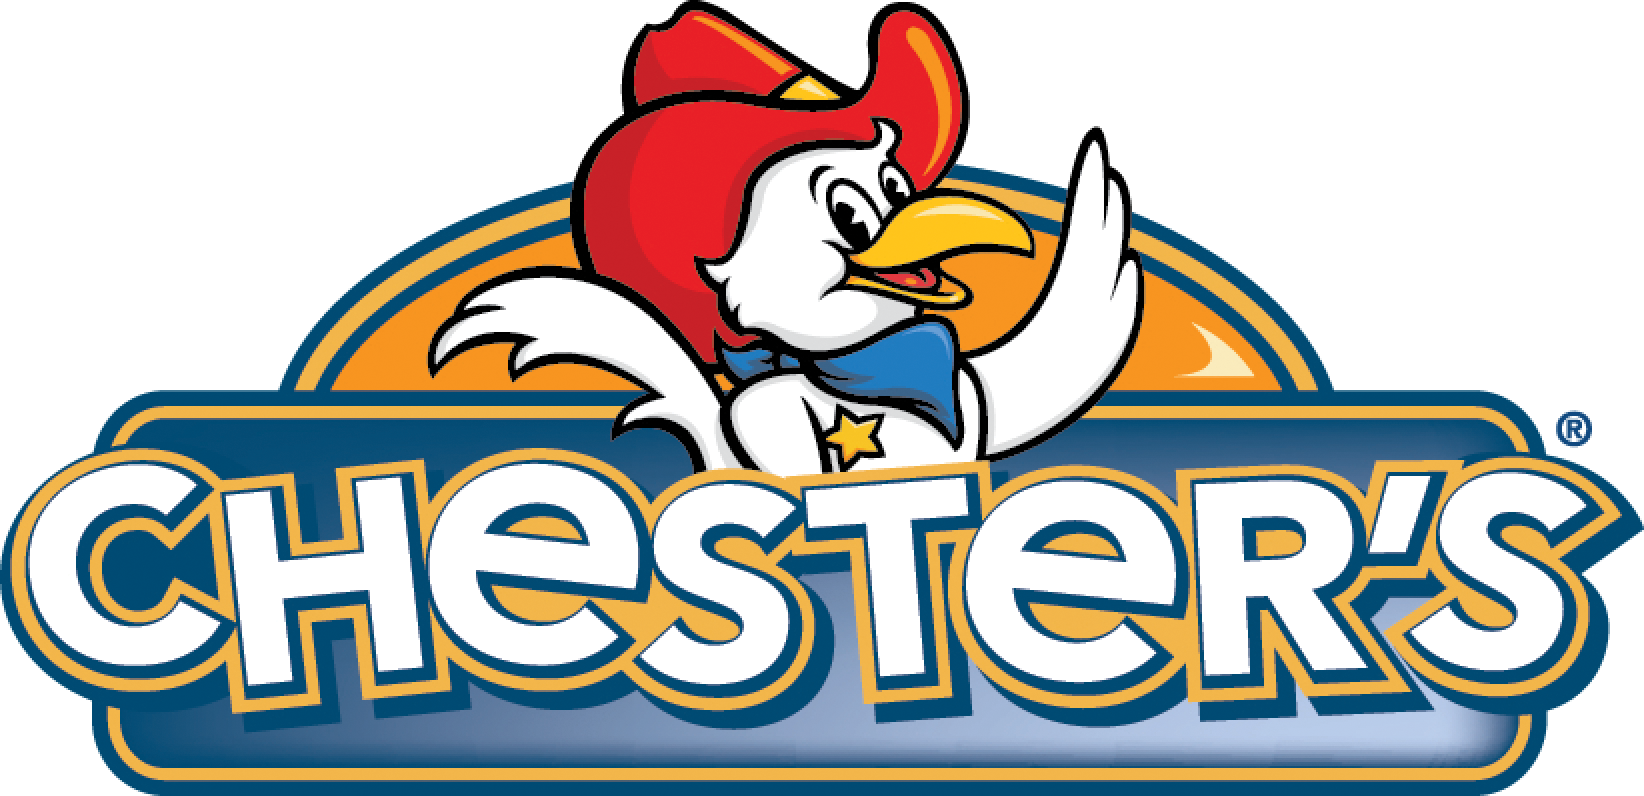 1 Chesters Logo